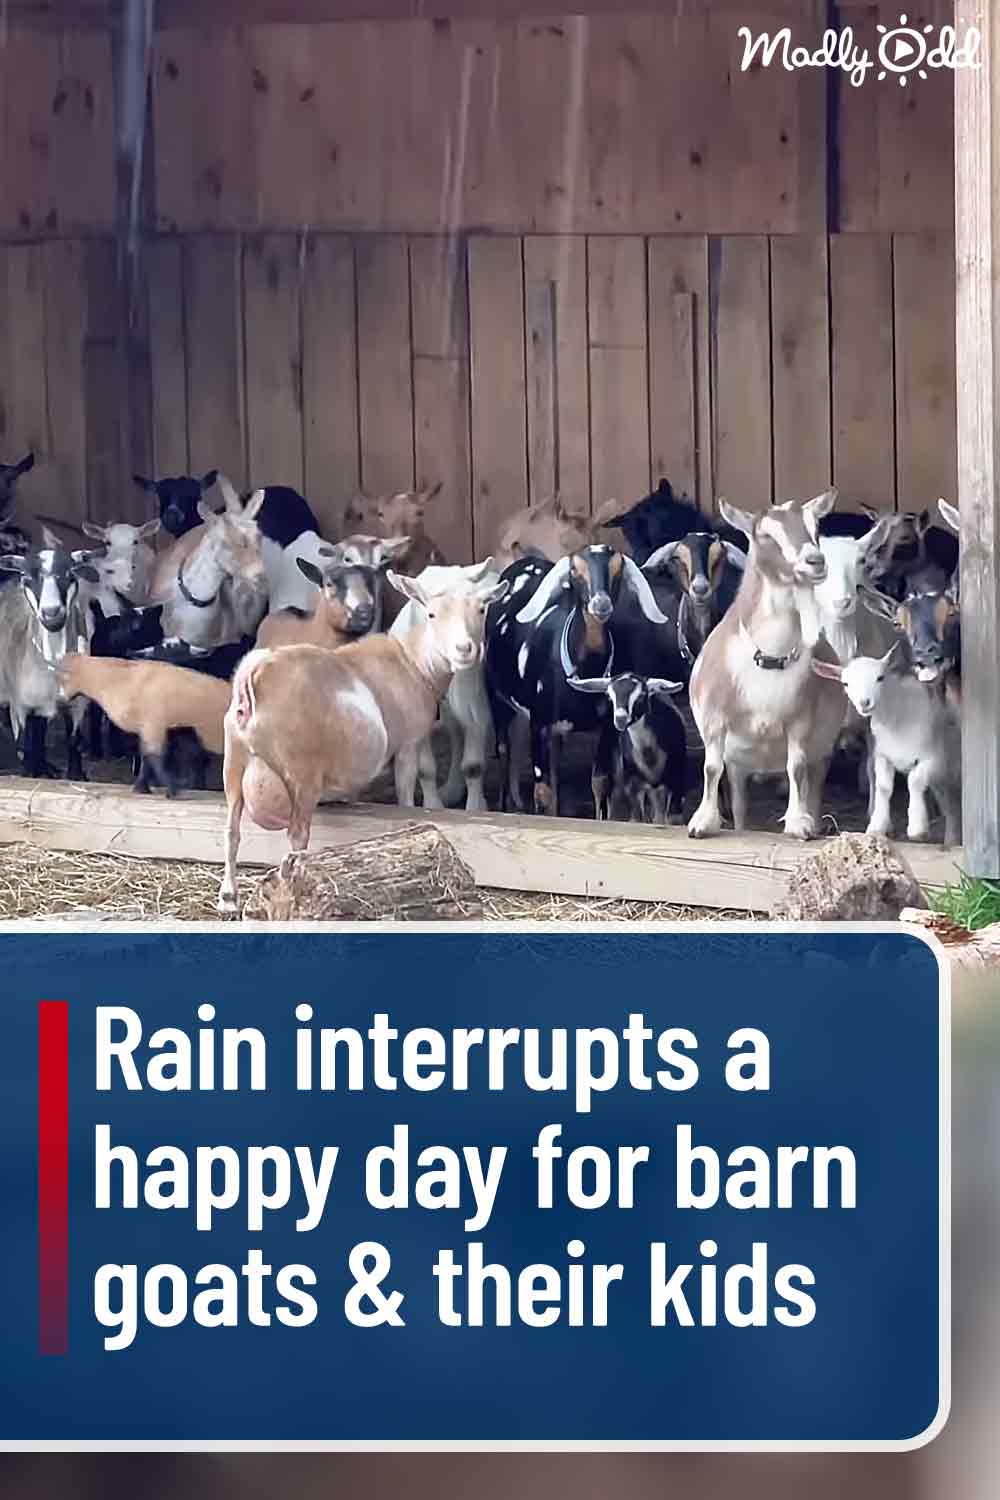 Rain interrupts a happy day for barn goats & their kids